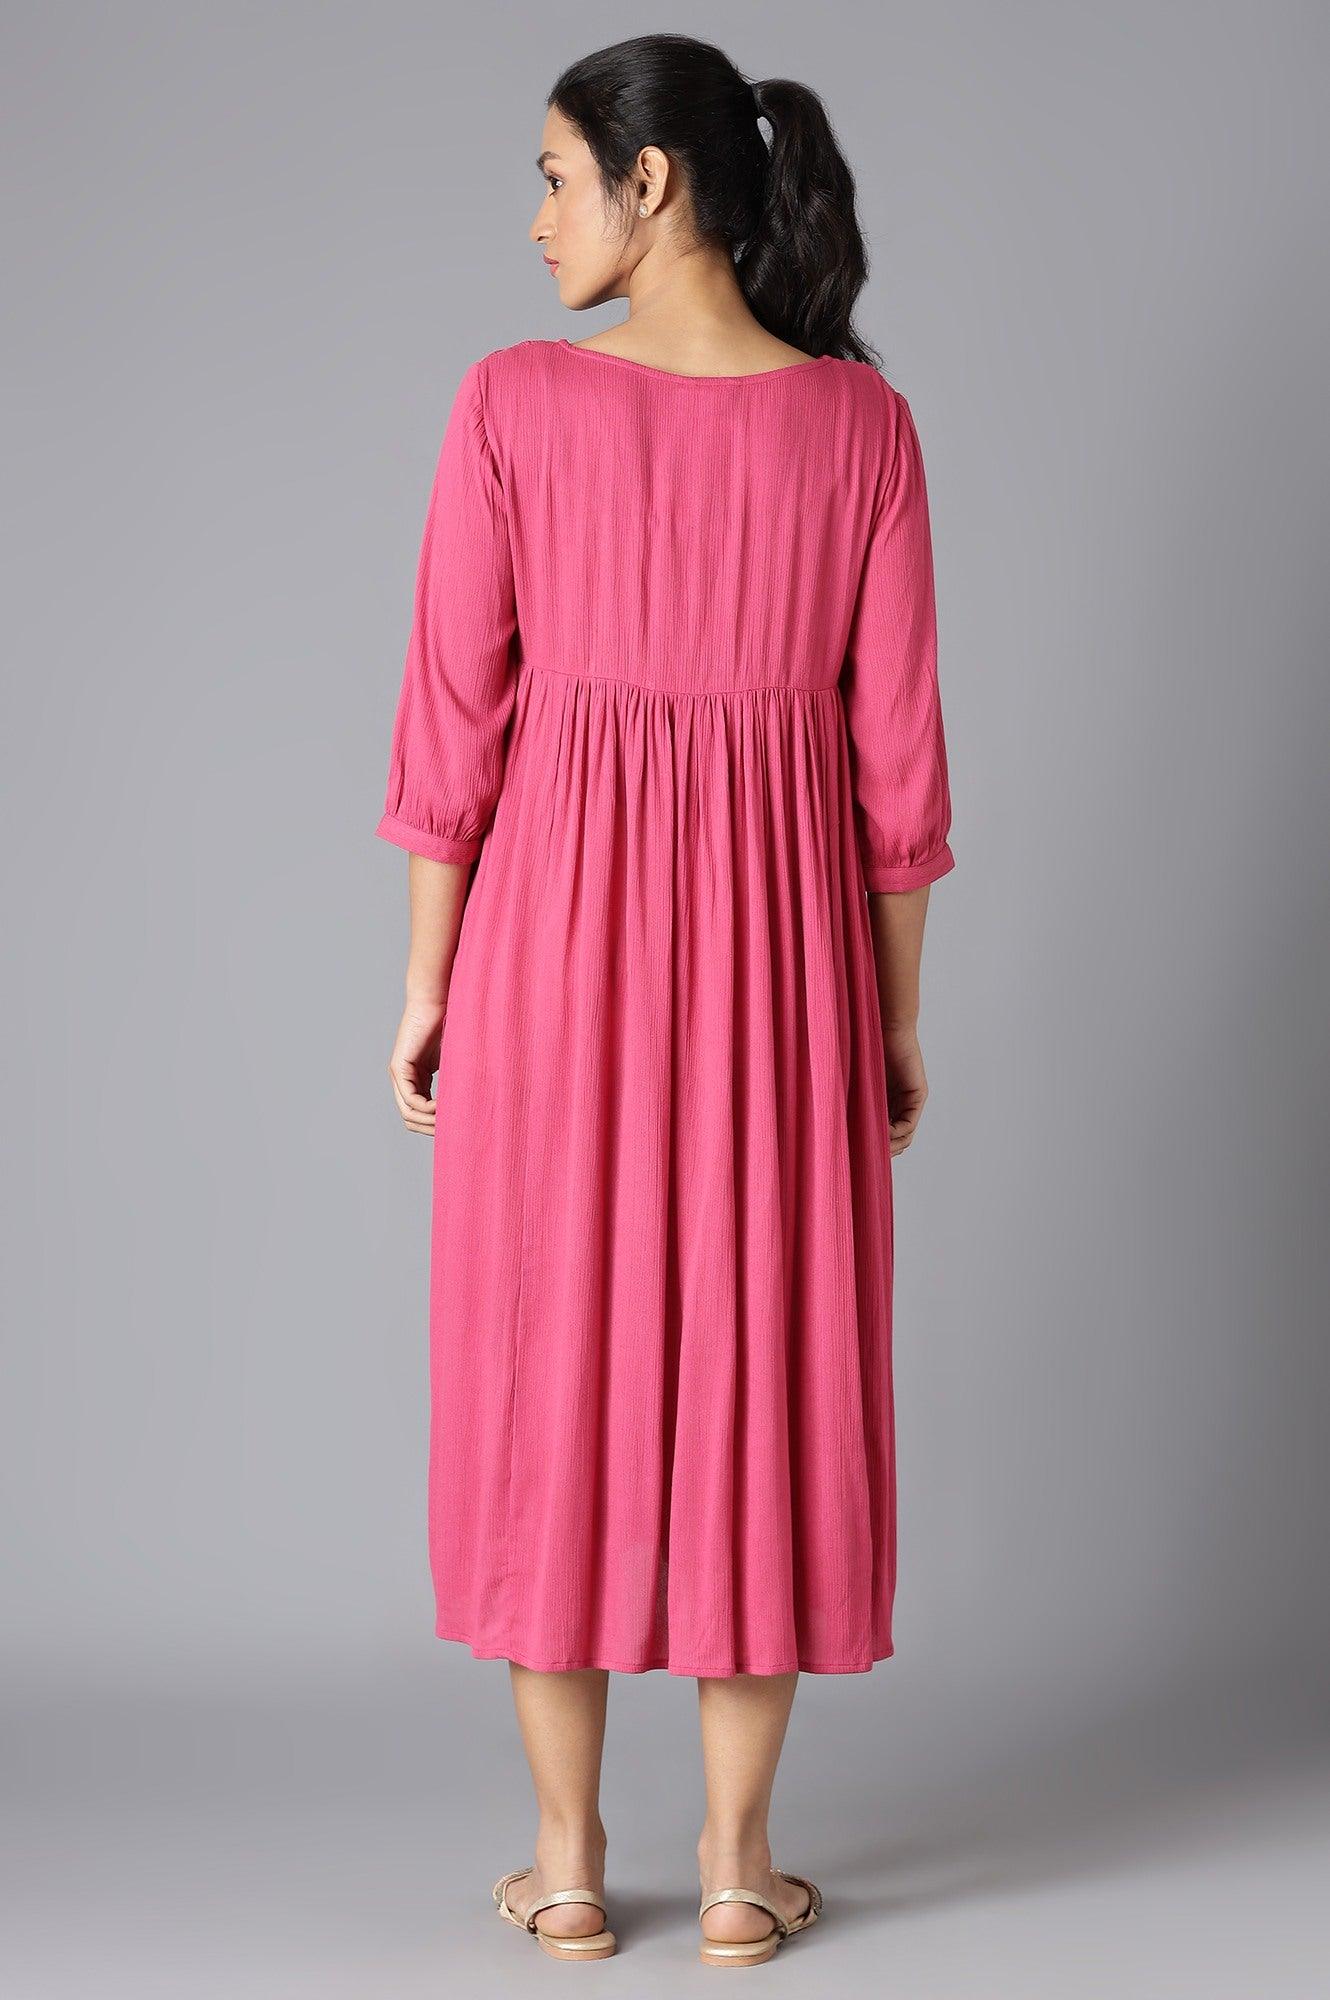 Dark Pink Flared Dress With Thread Embroidery - wforwoman